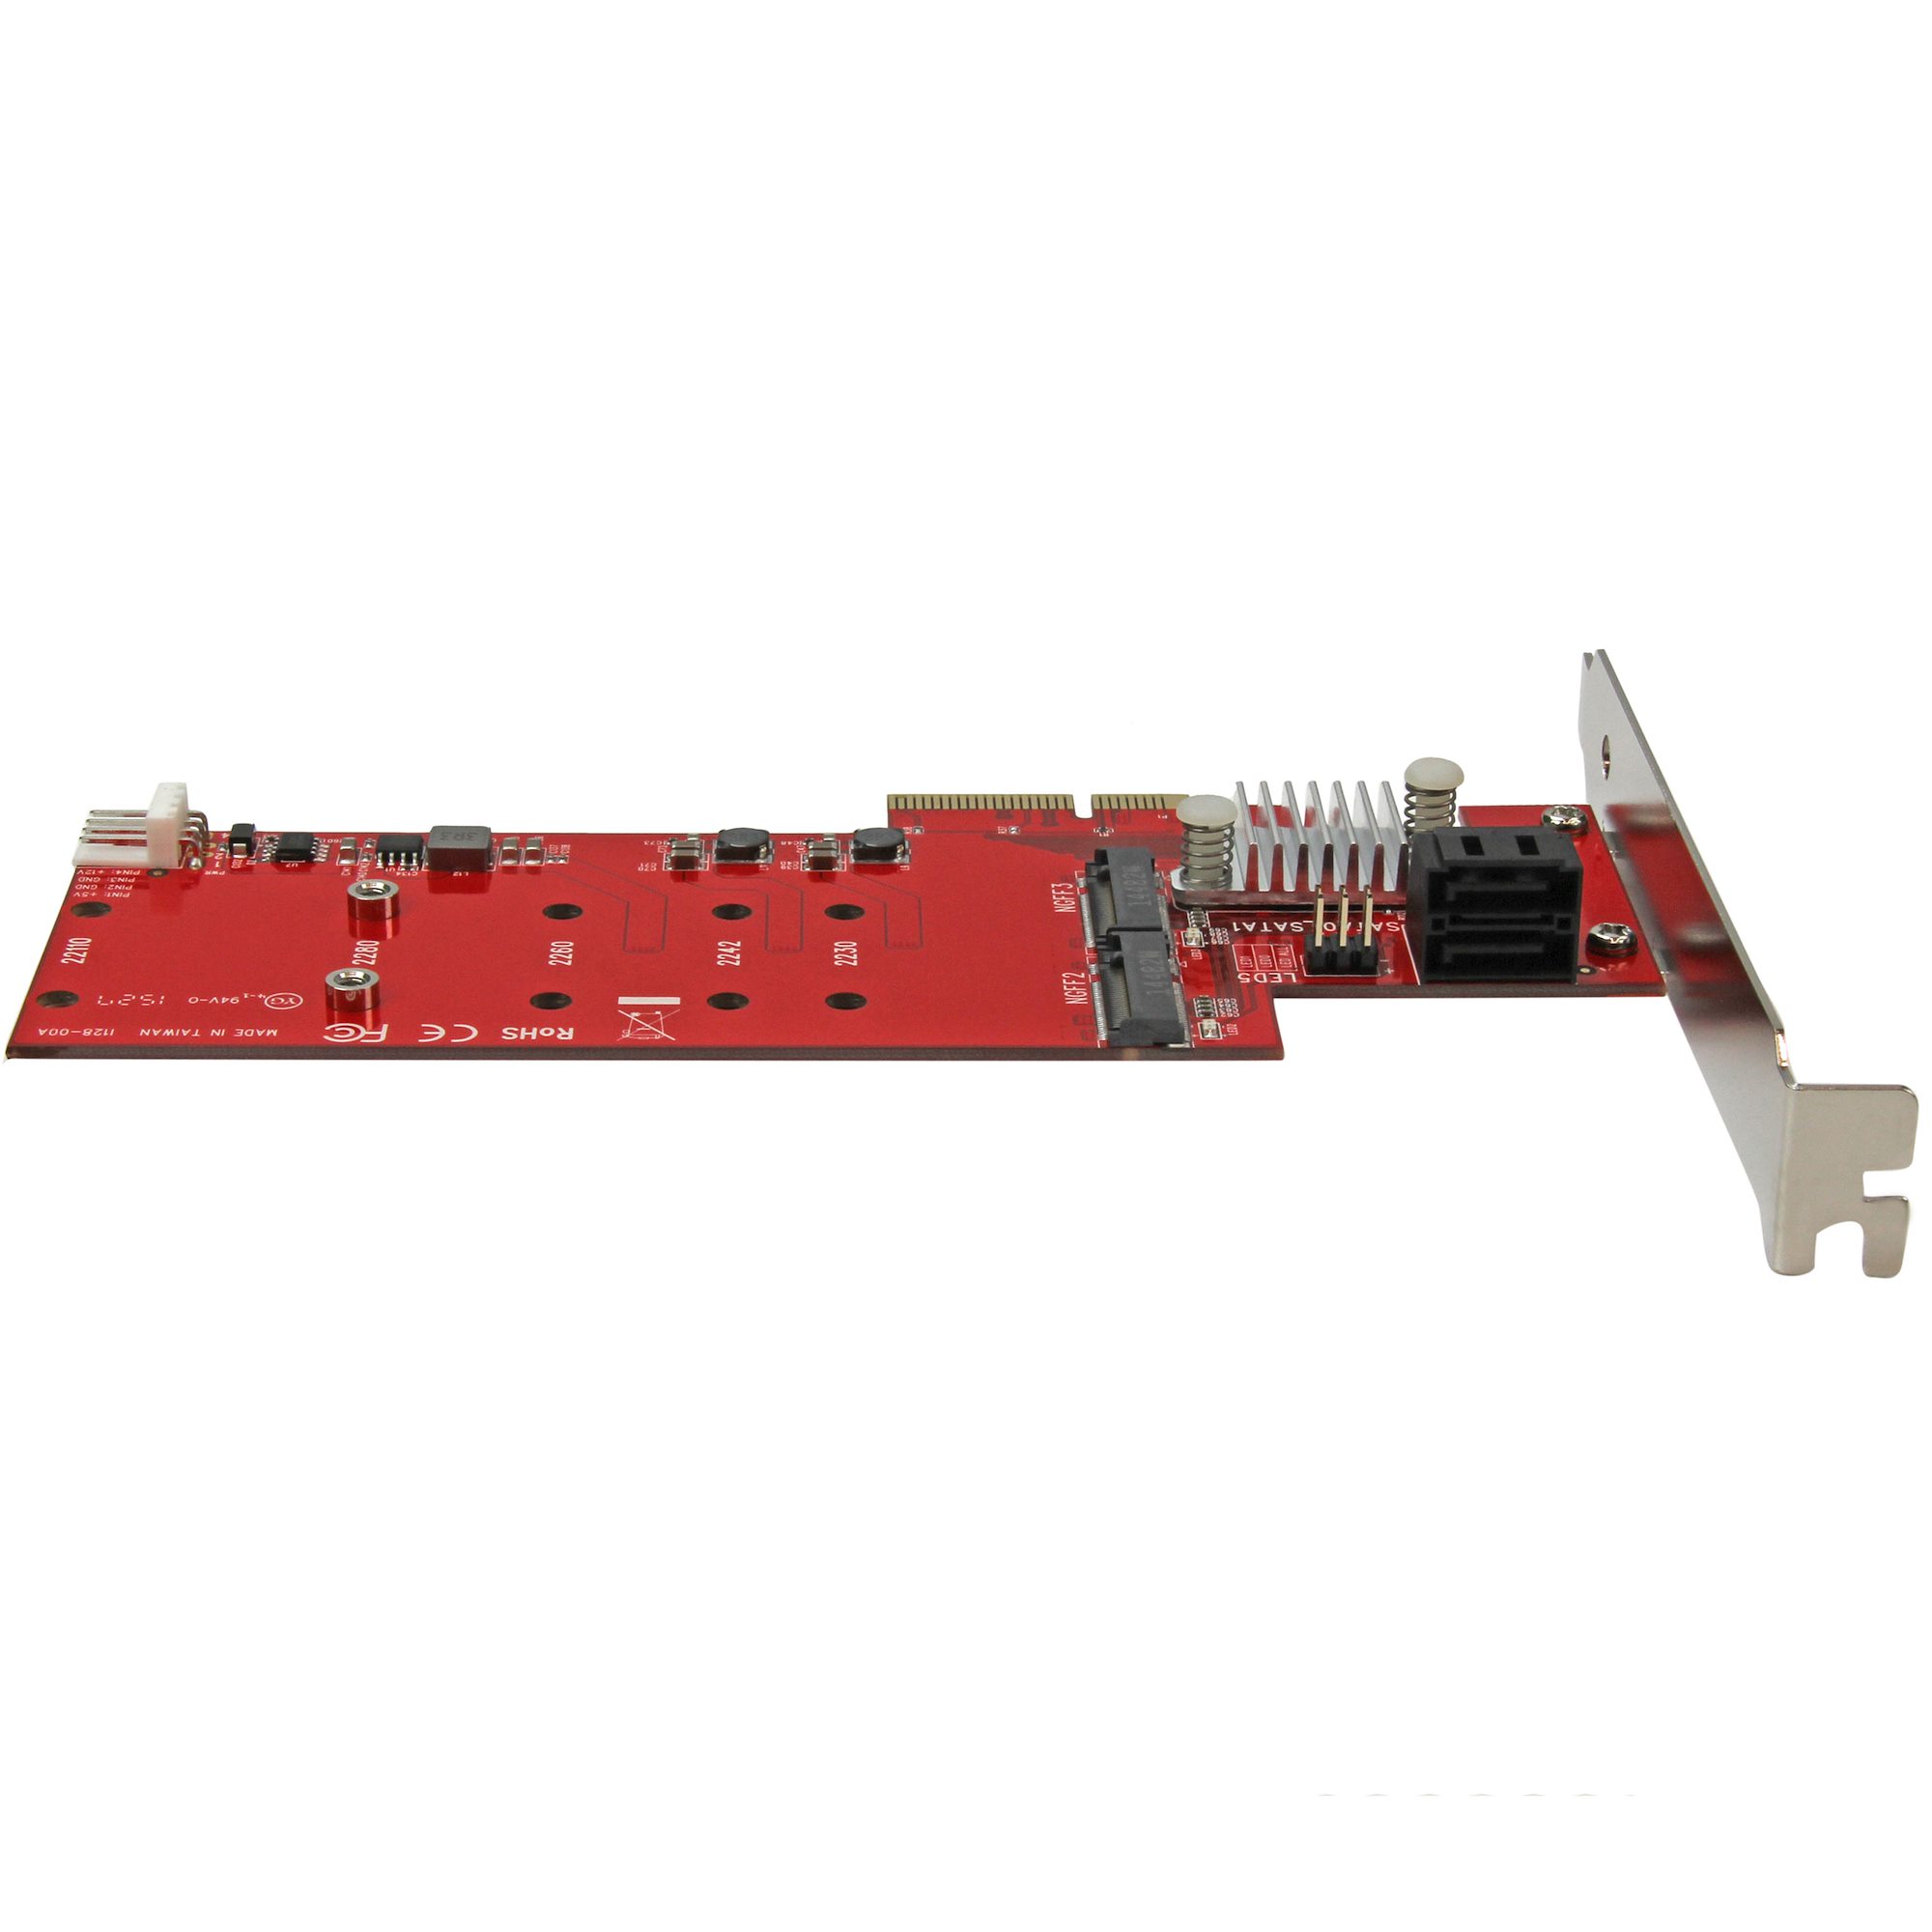  StarTech.com M.2 SATA SSD to 2.5in SATA Adapter - M.2 NGFF to  SATA Converter - 7mm - Open-Frame Bracket (SAT32M225) : Everything Else